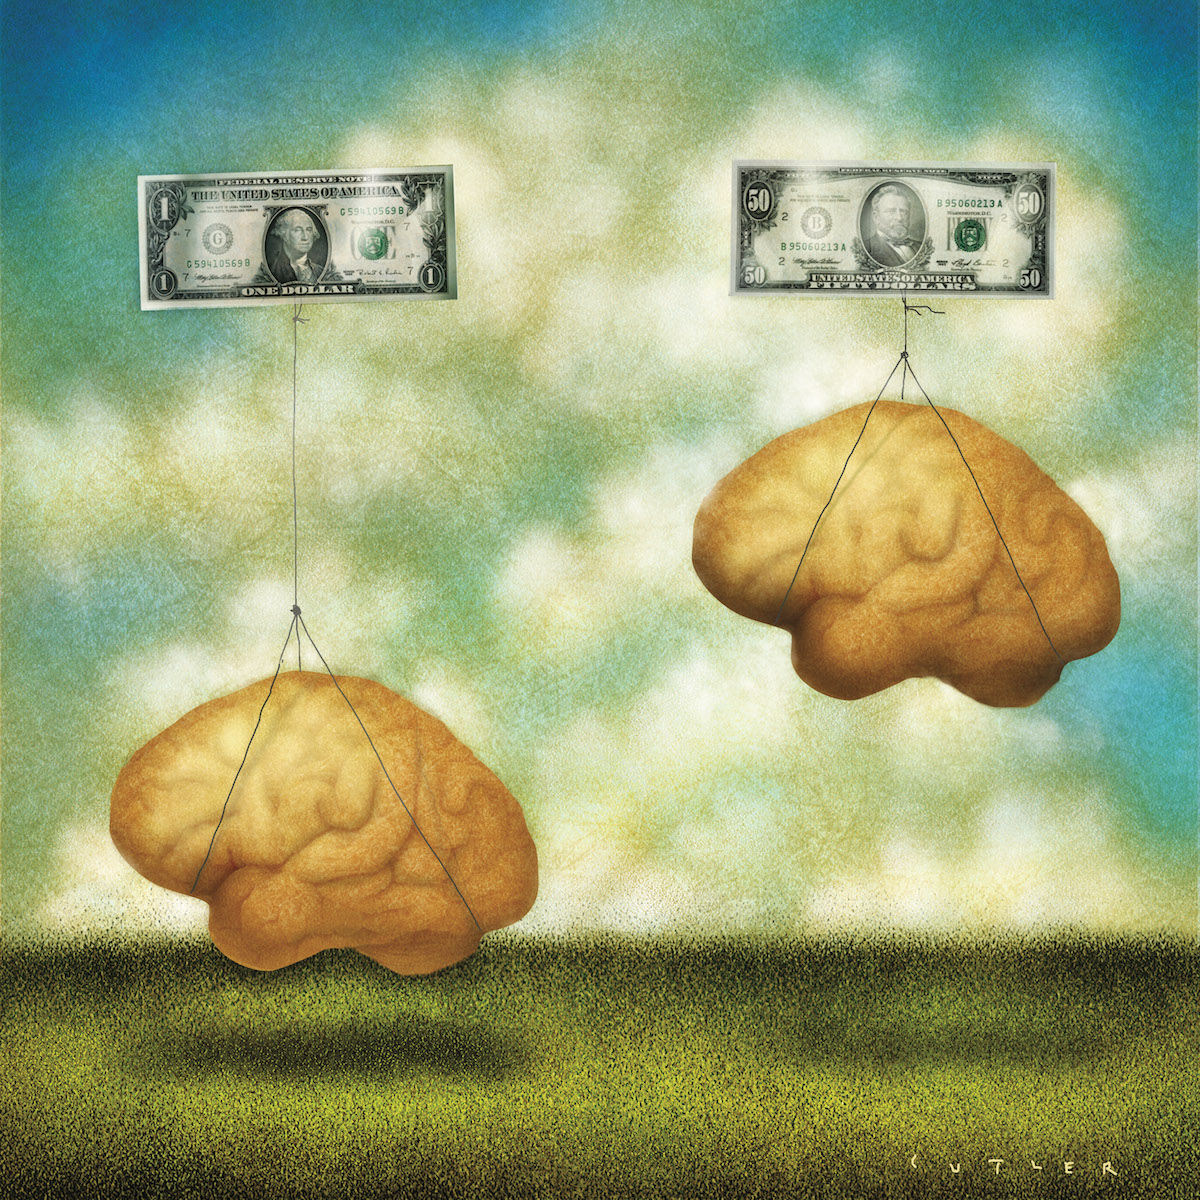 An illustration of two brains being held aloft by dollars